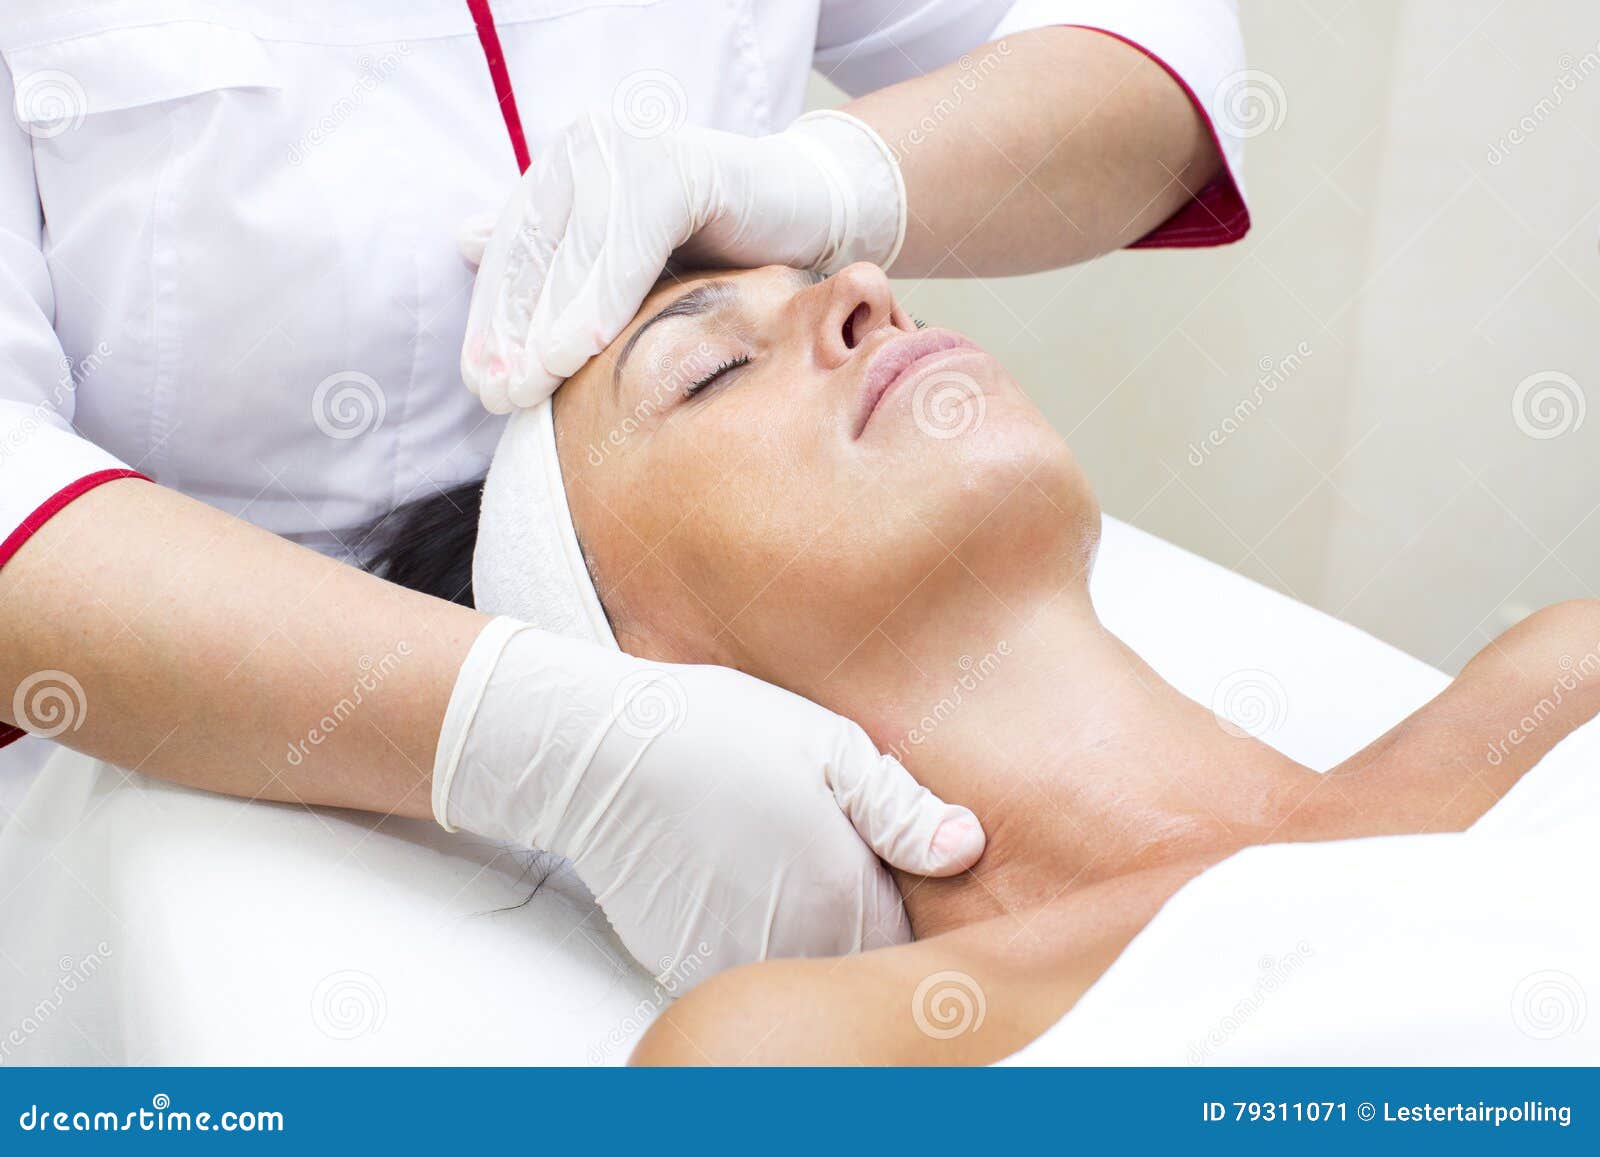 Process Of Massage And Facials Stock Image Image Of Healthy Cure